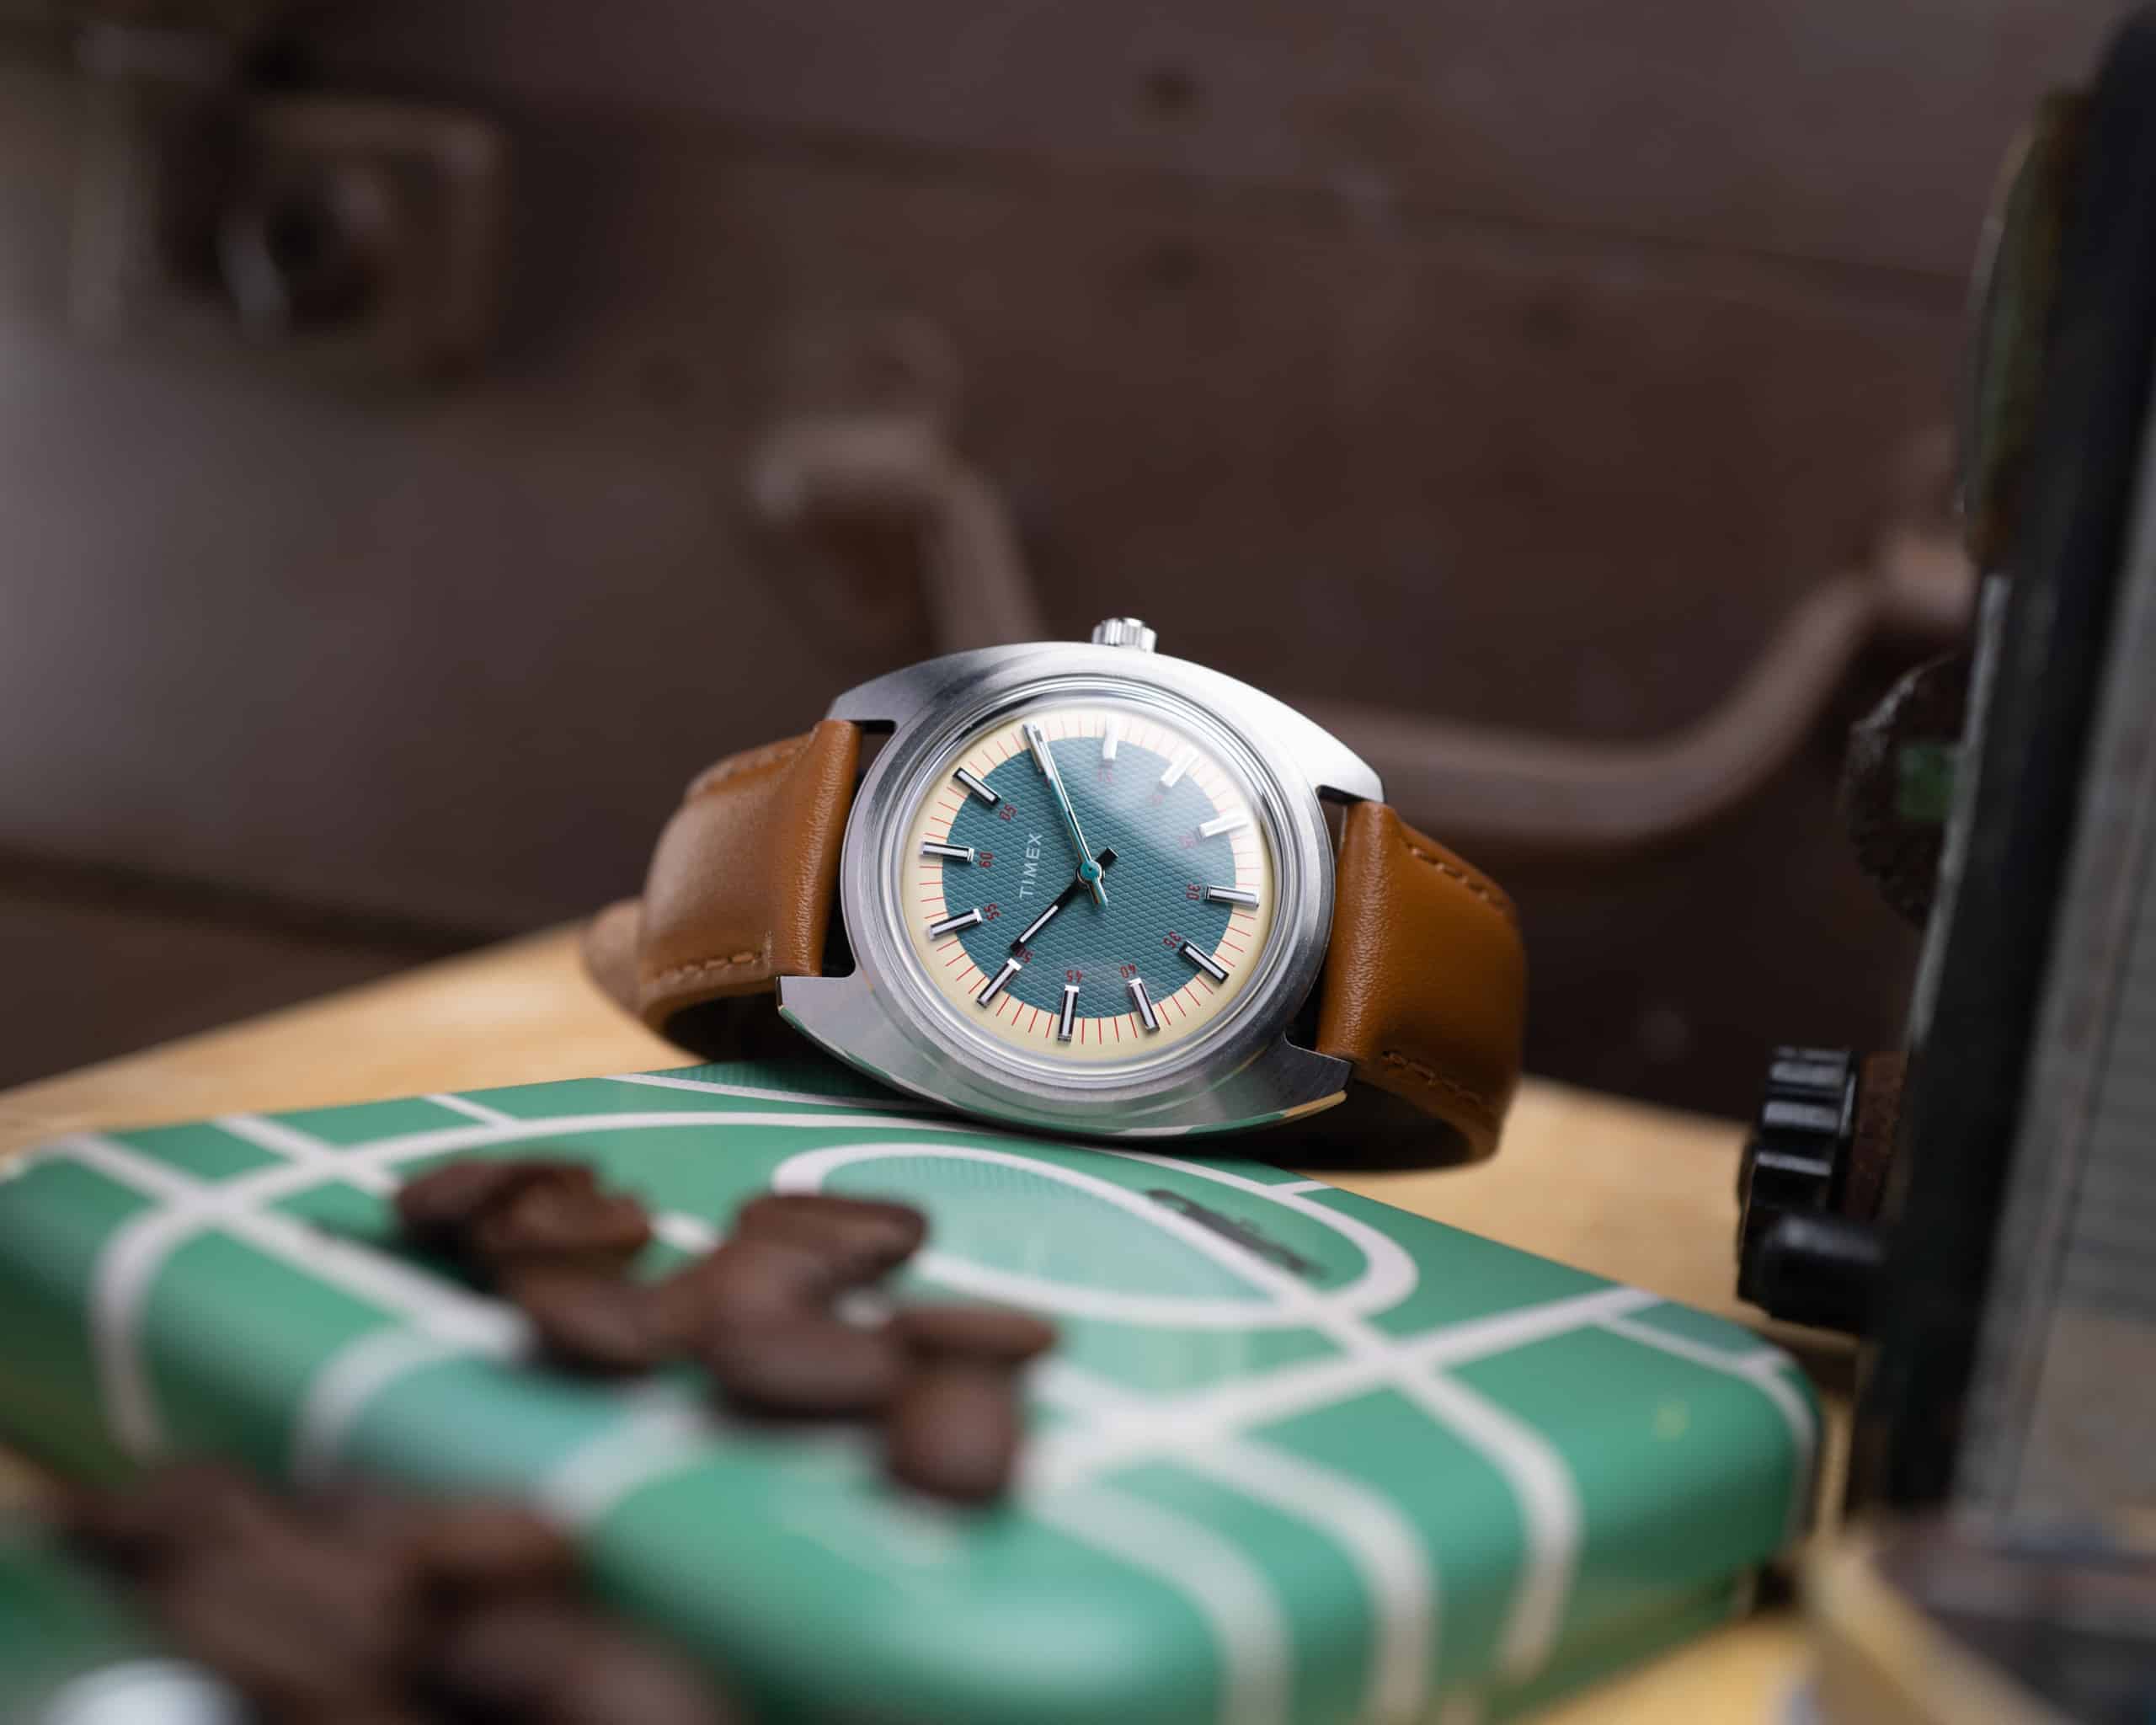 Our Favorite Instagram Shots of the Timex x Worn & Wound WW75 Limited Edition